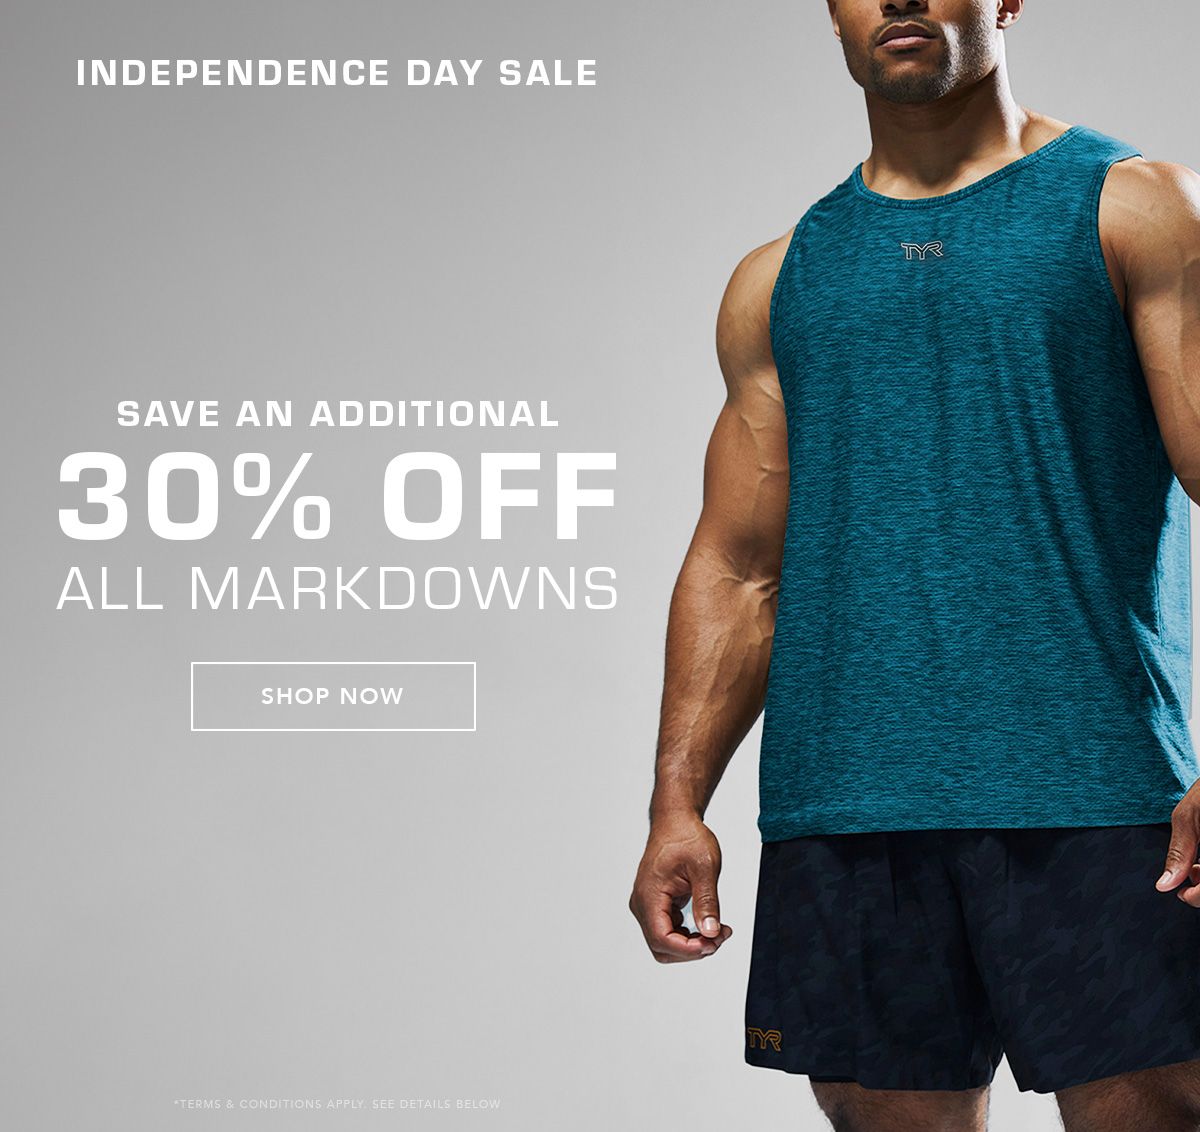 Save an additional 30% off all markdowns